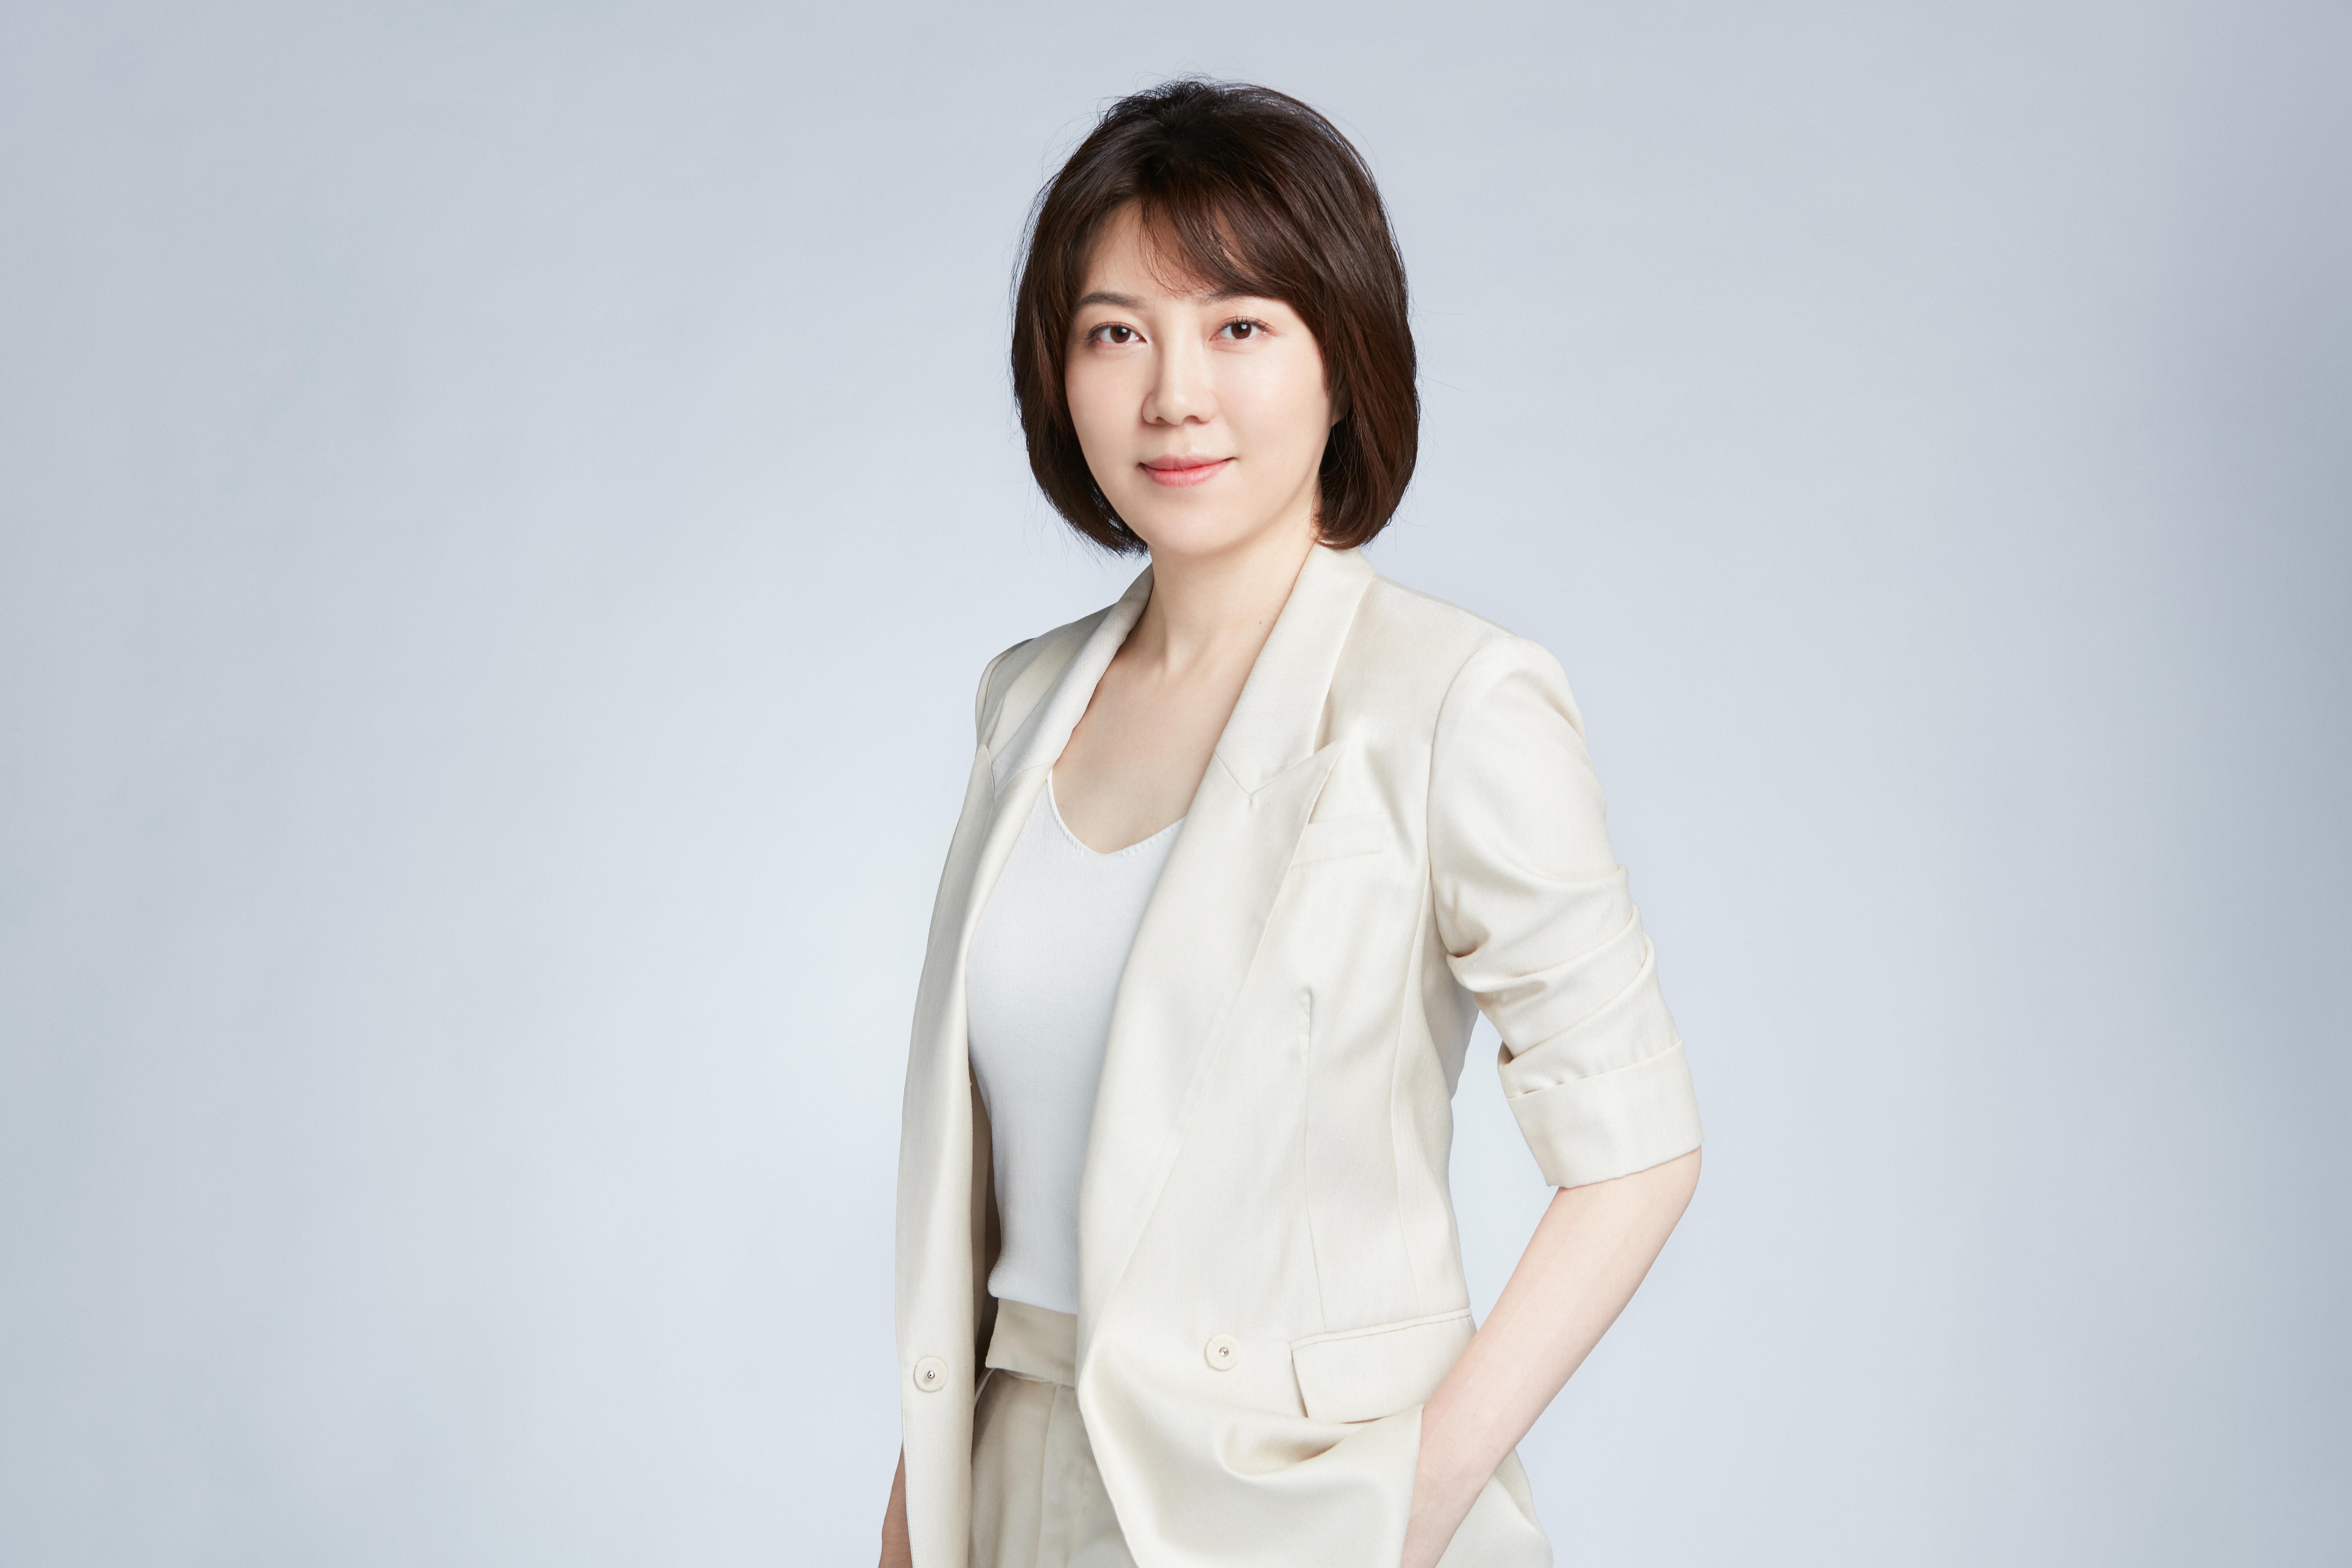 ByteDance CEO Kelly Zhang is responsible for ByteDance’s products in the domestic market, leading product management and operations, marketing, and partnerships. Photo: Handout